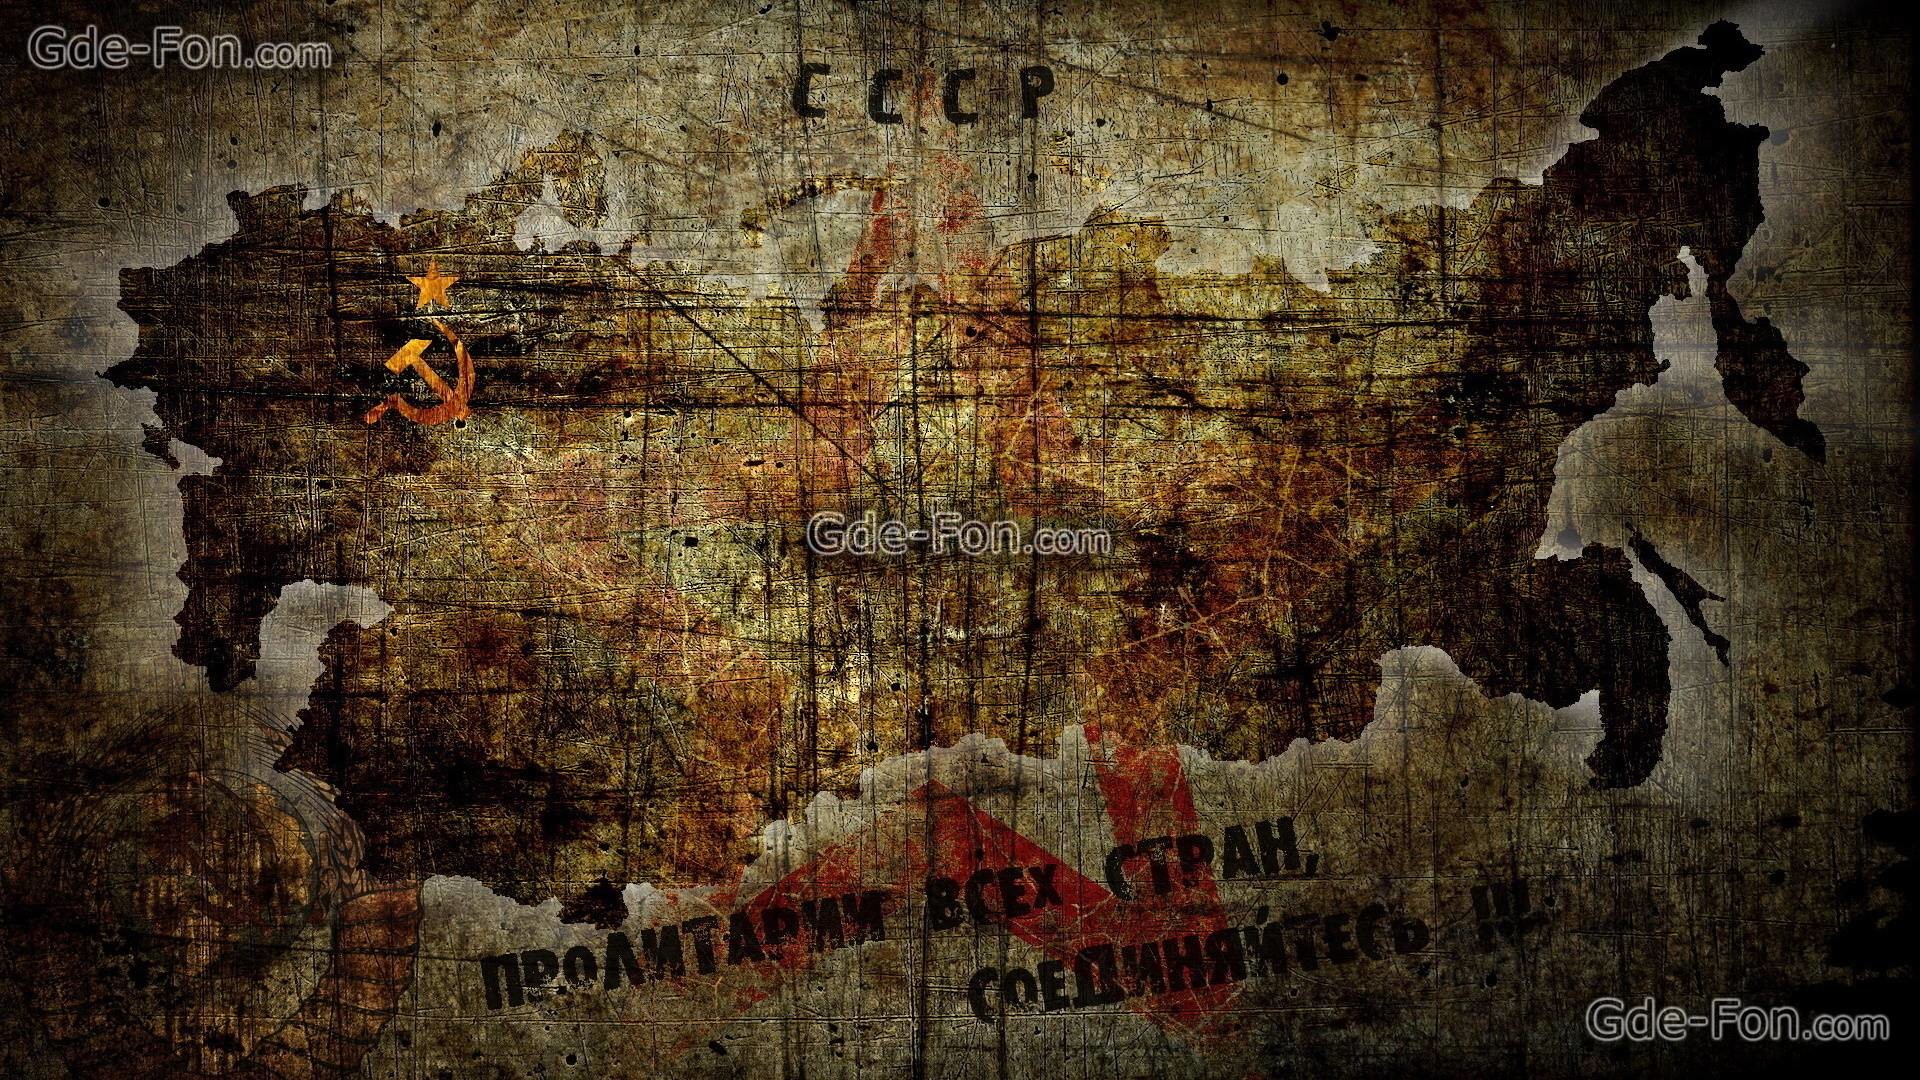 1920x1080 Download wallpaper map, USSR, the Soviet Union, hammer and sickle .